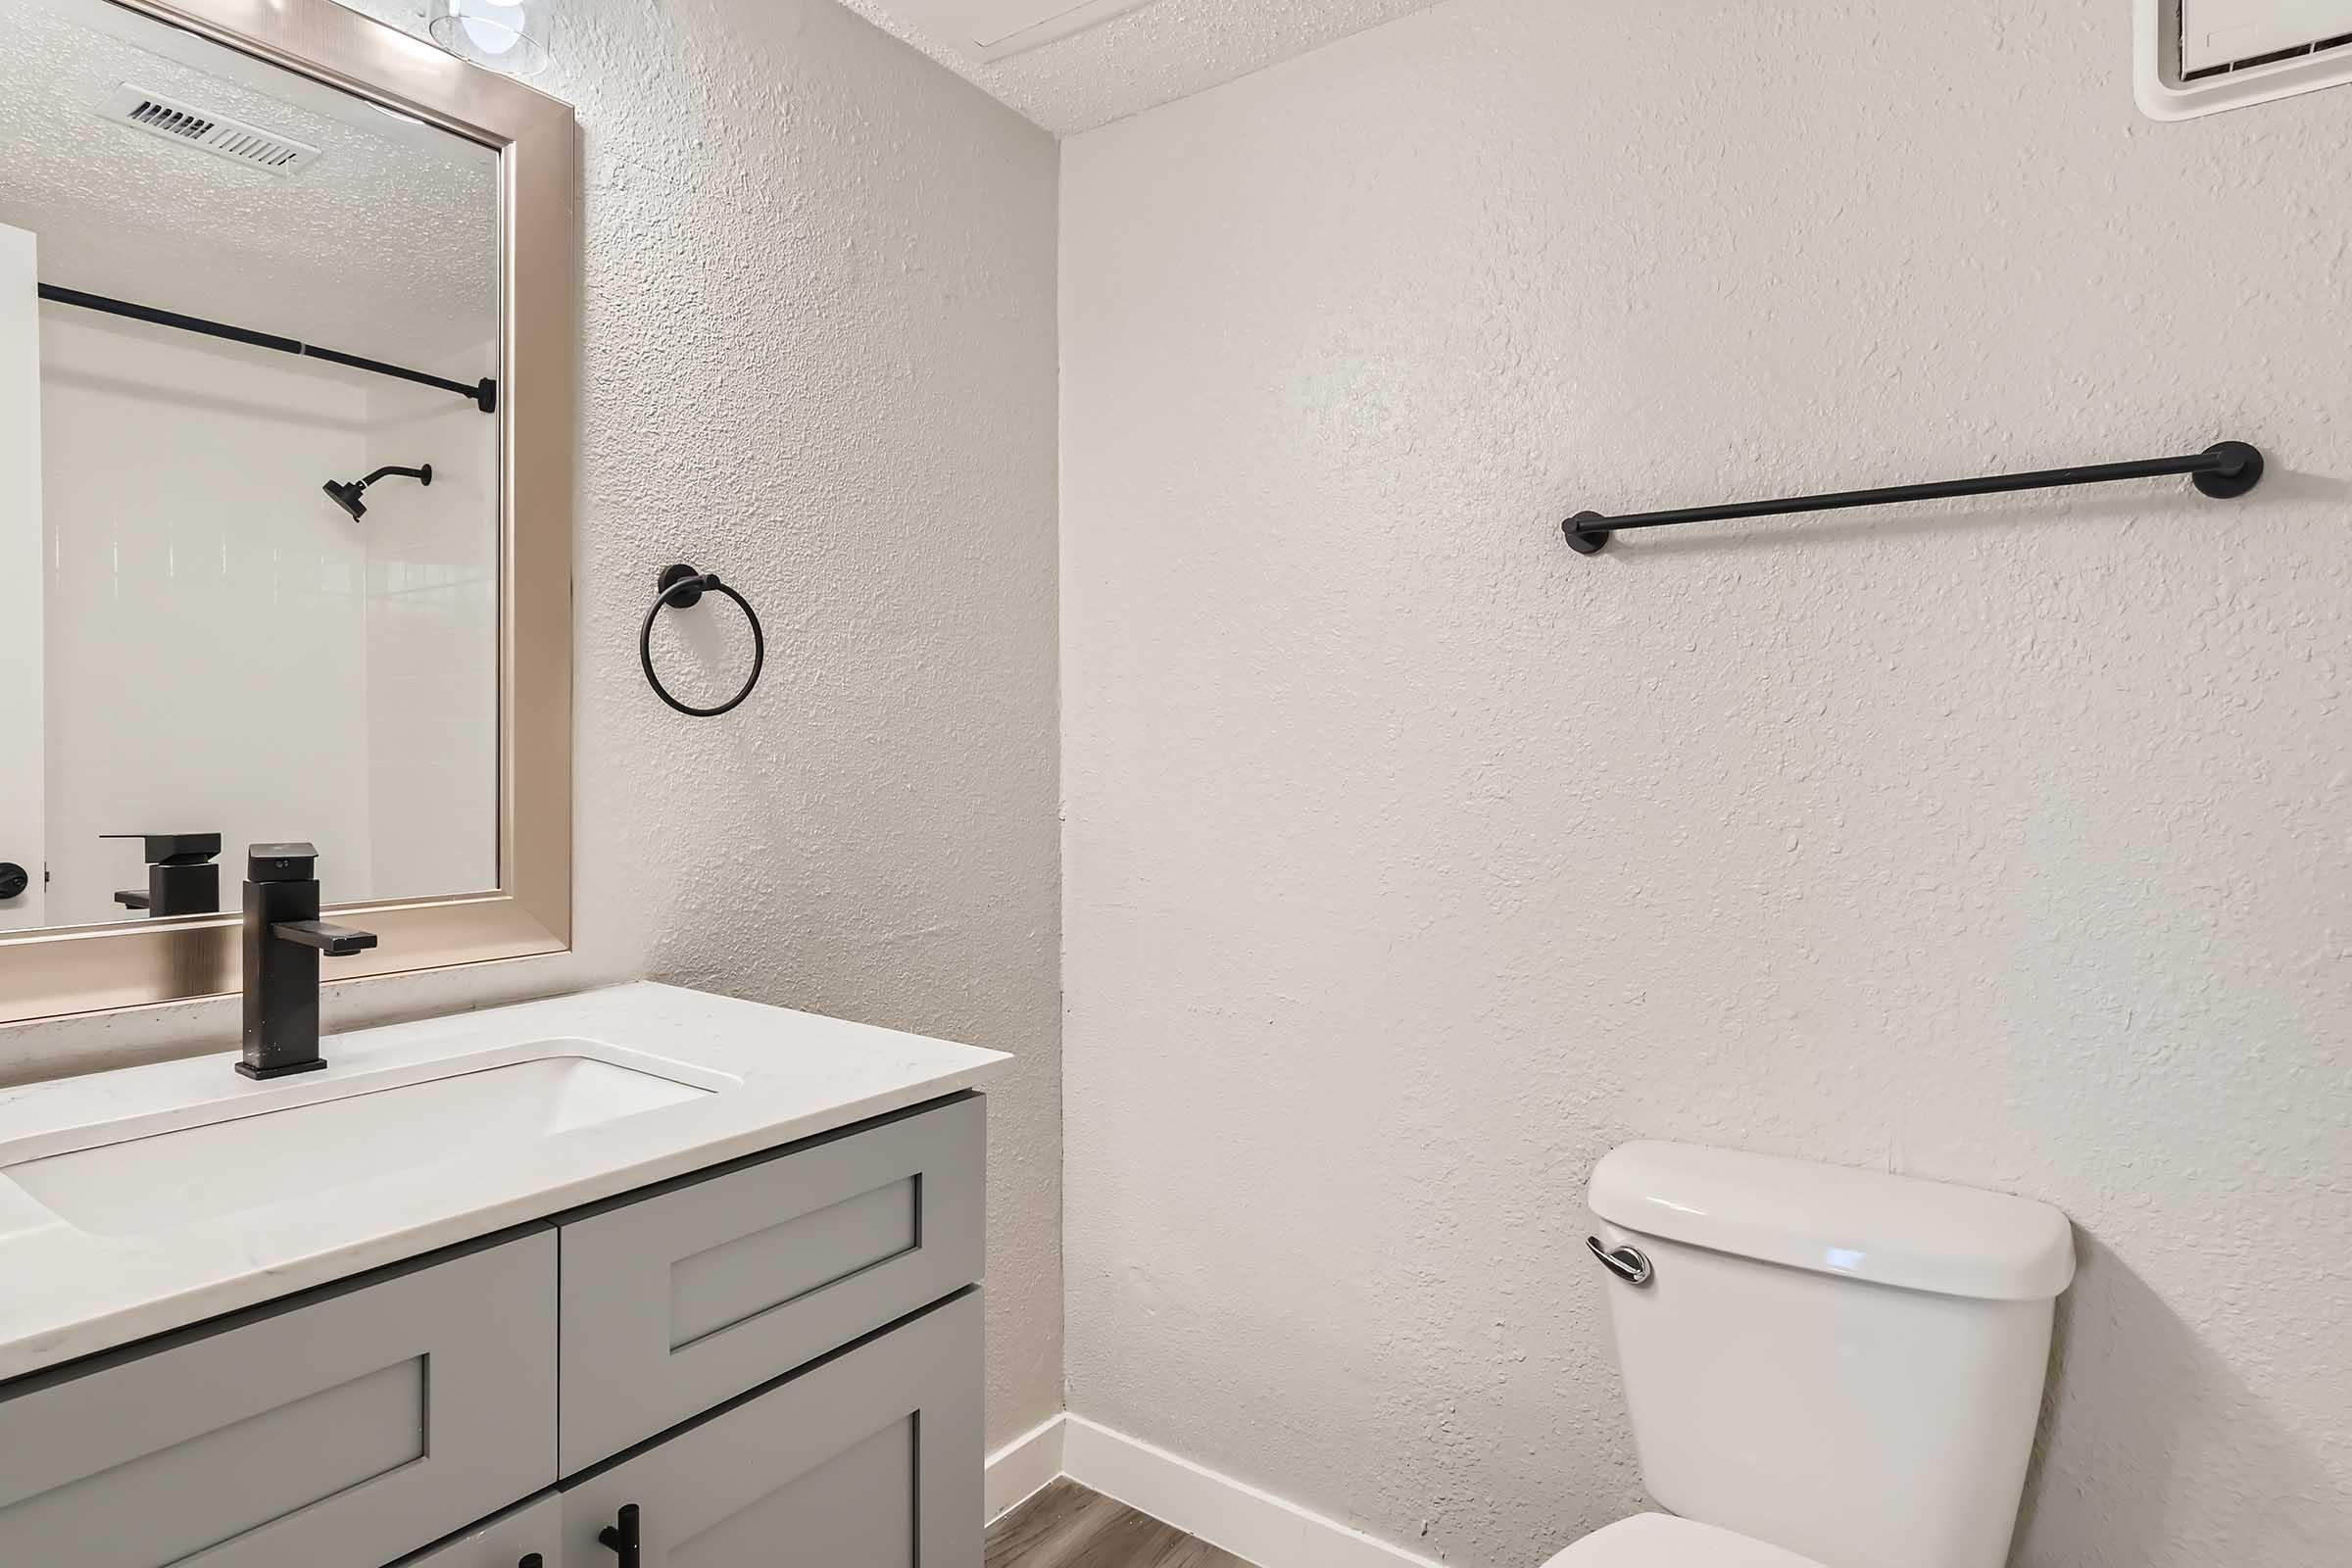 An apartment bathroom with a sink and mirror at Rise North Arlington.